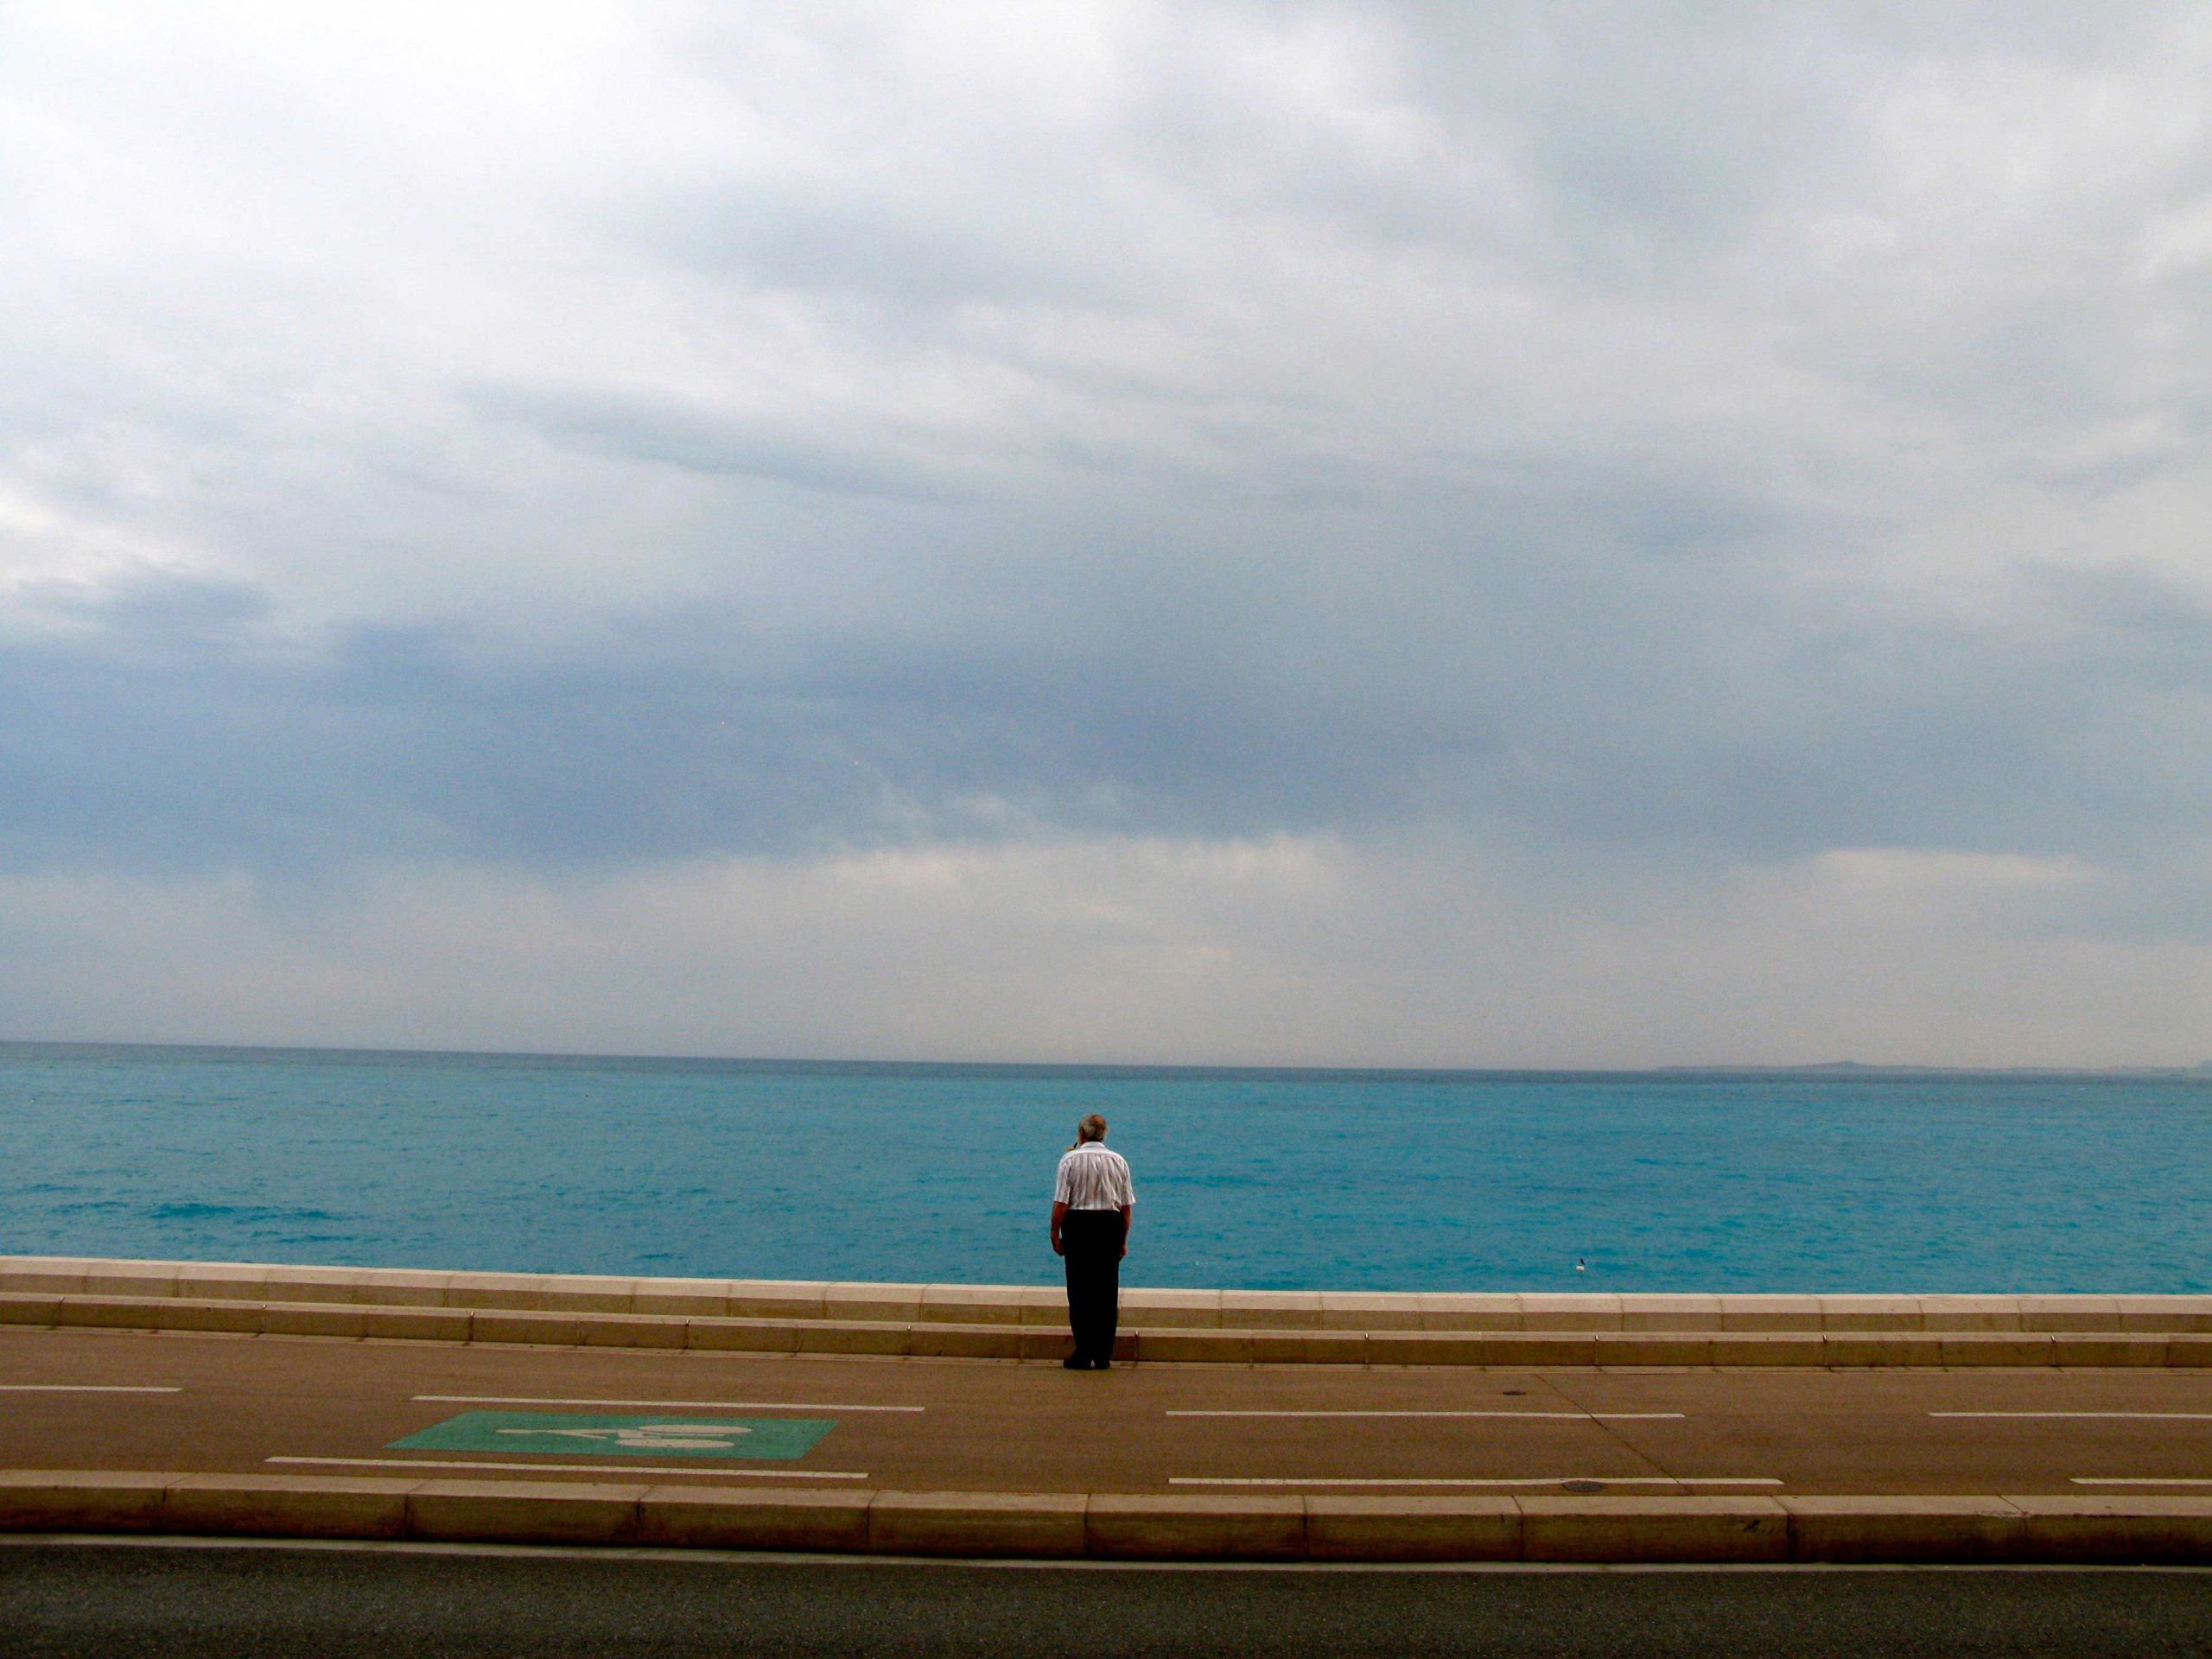 A man standing in the middle of a road before a bright blue ocean.